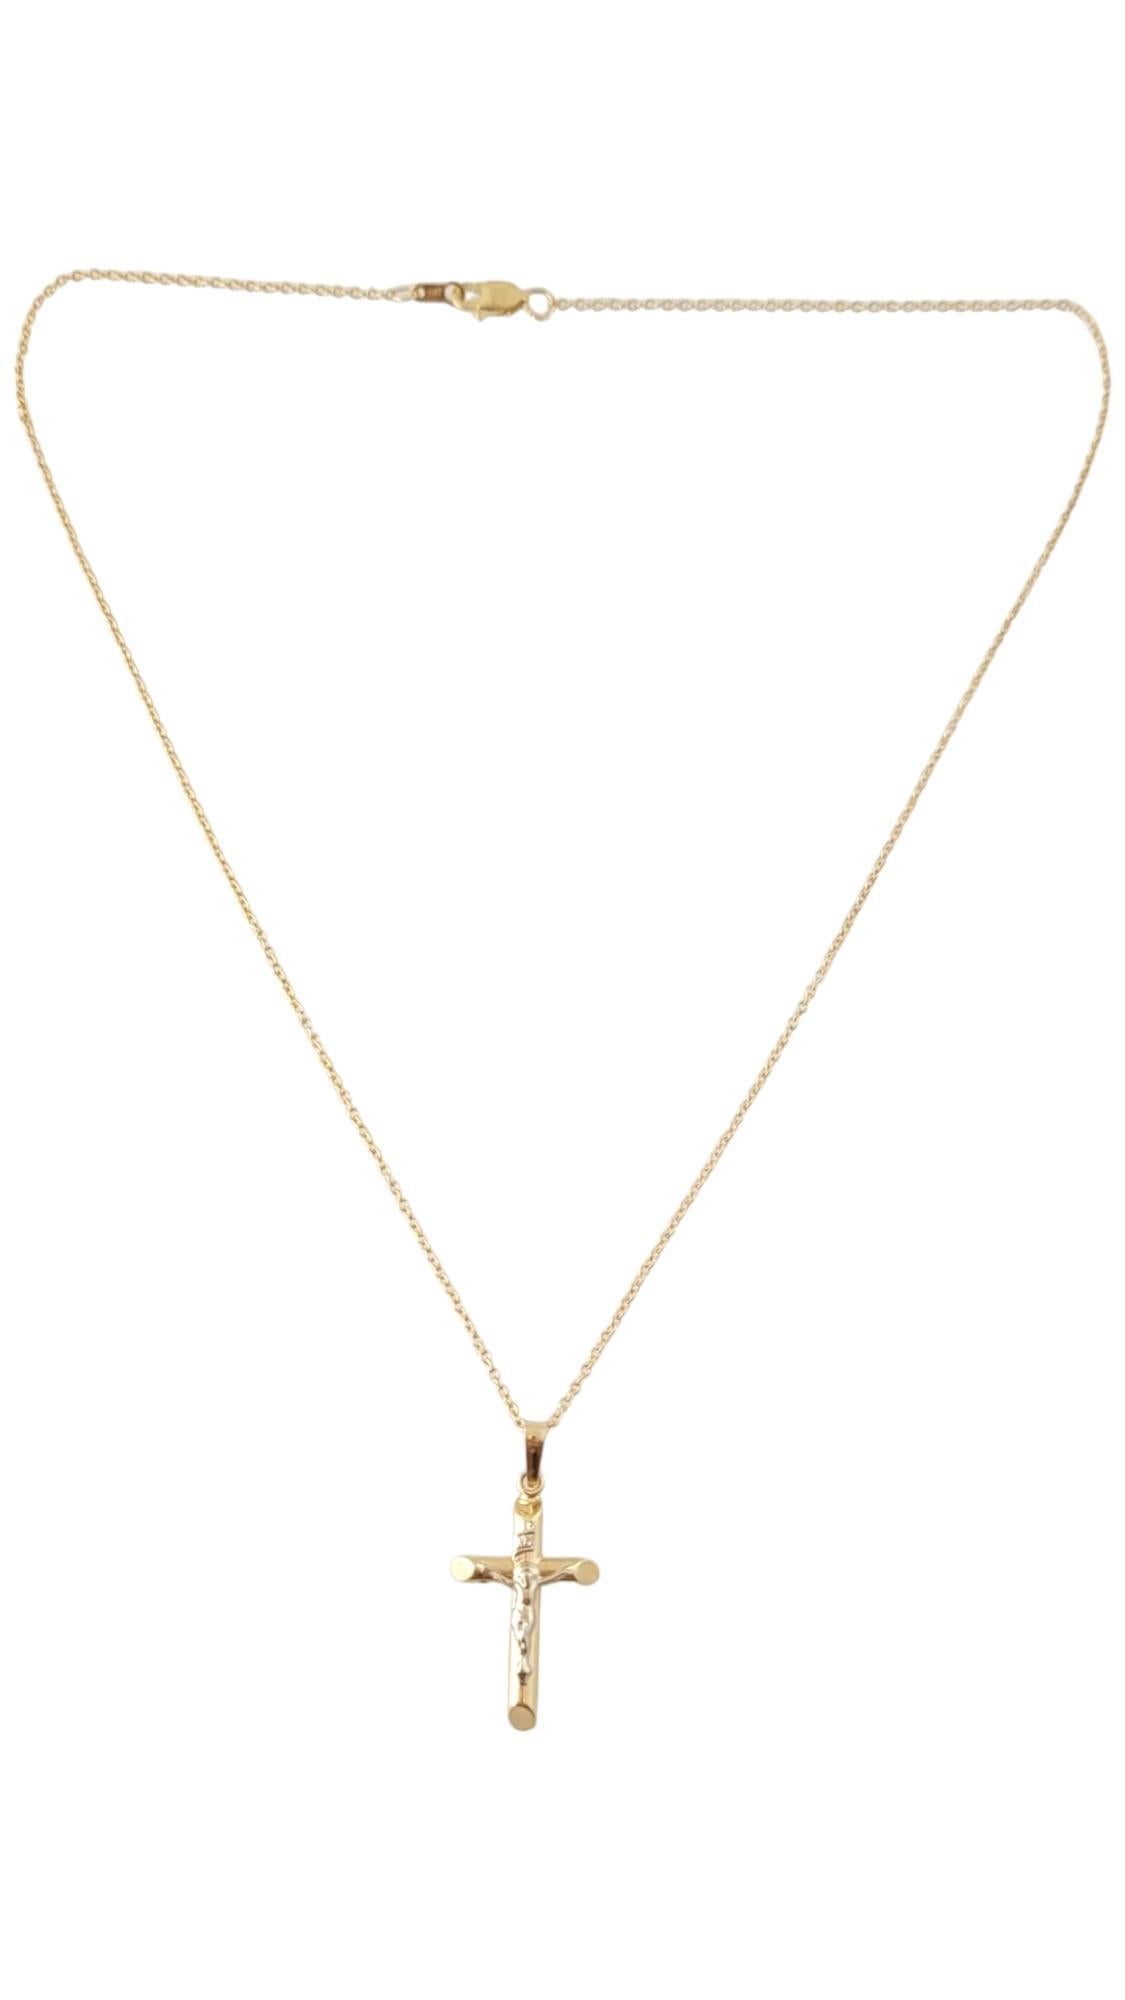 14K Yellow Gold Crucifix Pendant Necklace #16878

This gorgeous 14K gold crucifix pendant is paired with a beautiful 14K gold chain to make the perfect necklace!

Chain length: 15